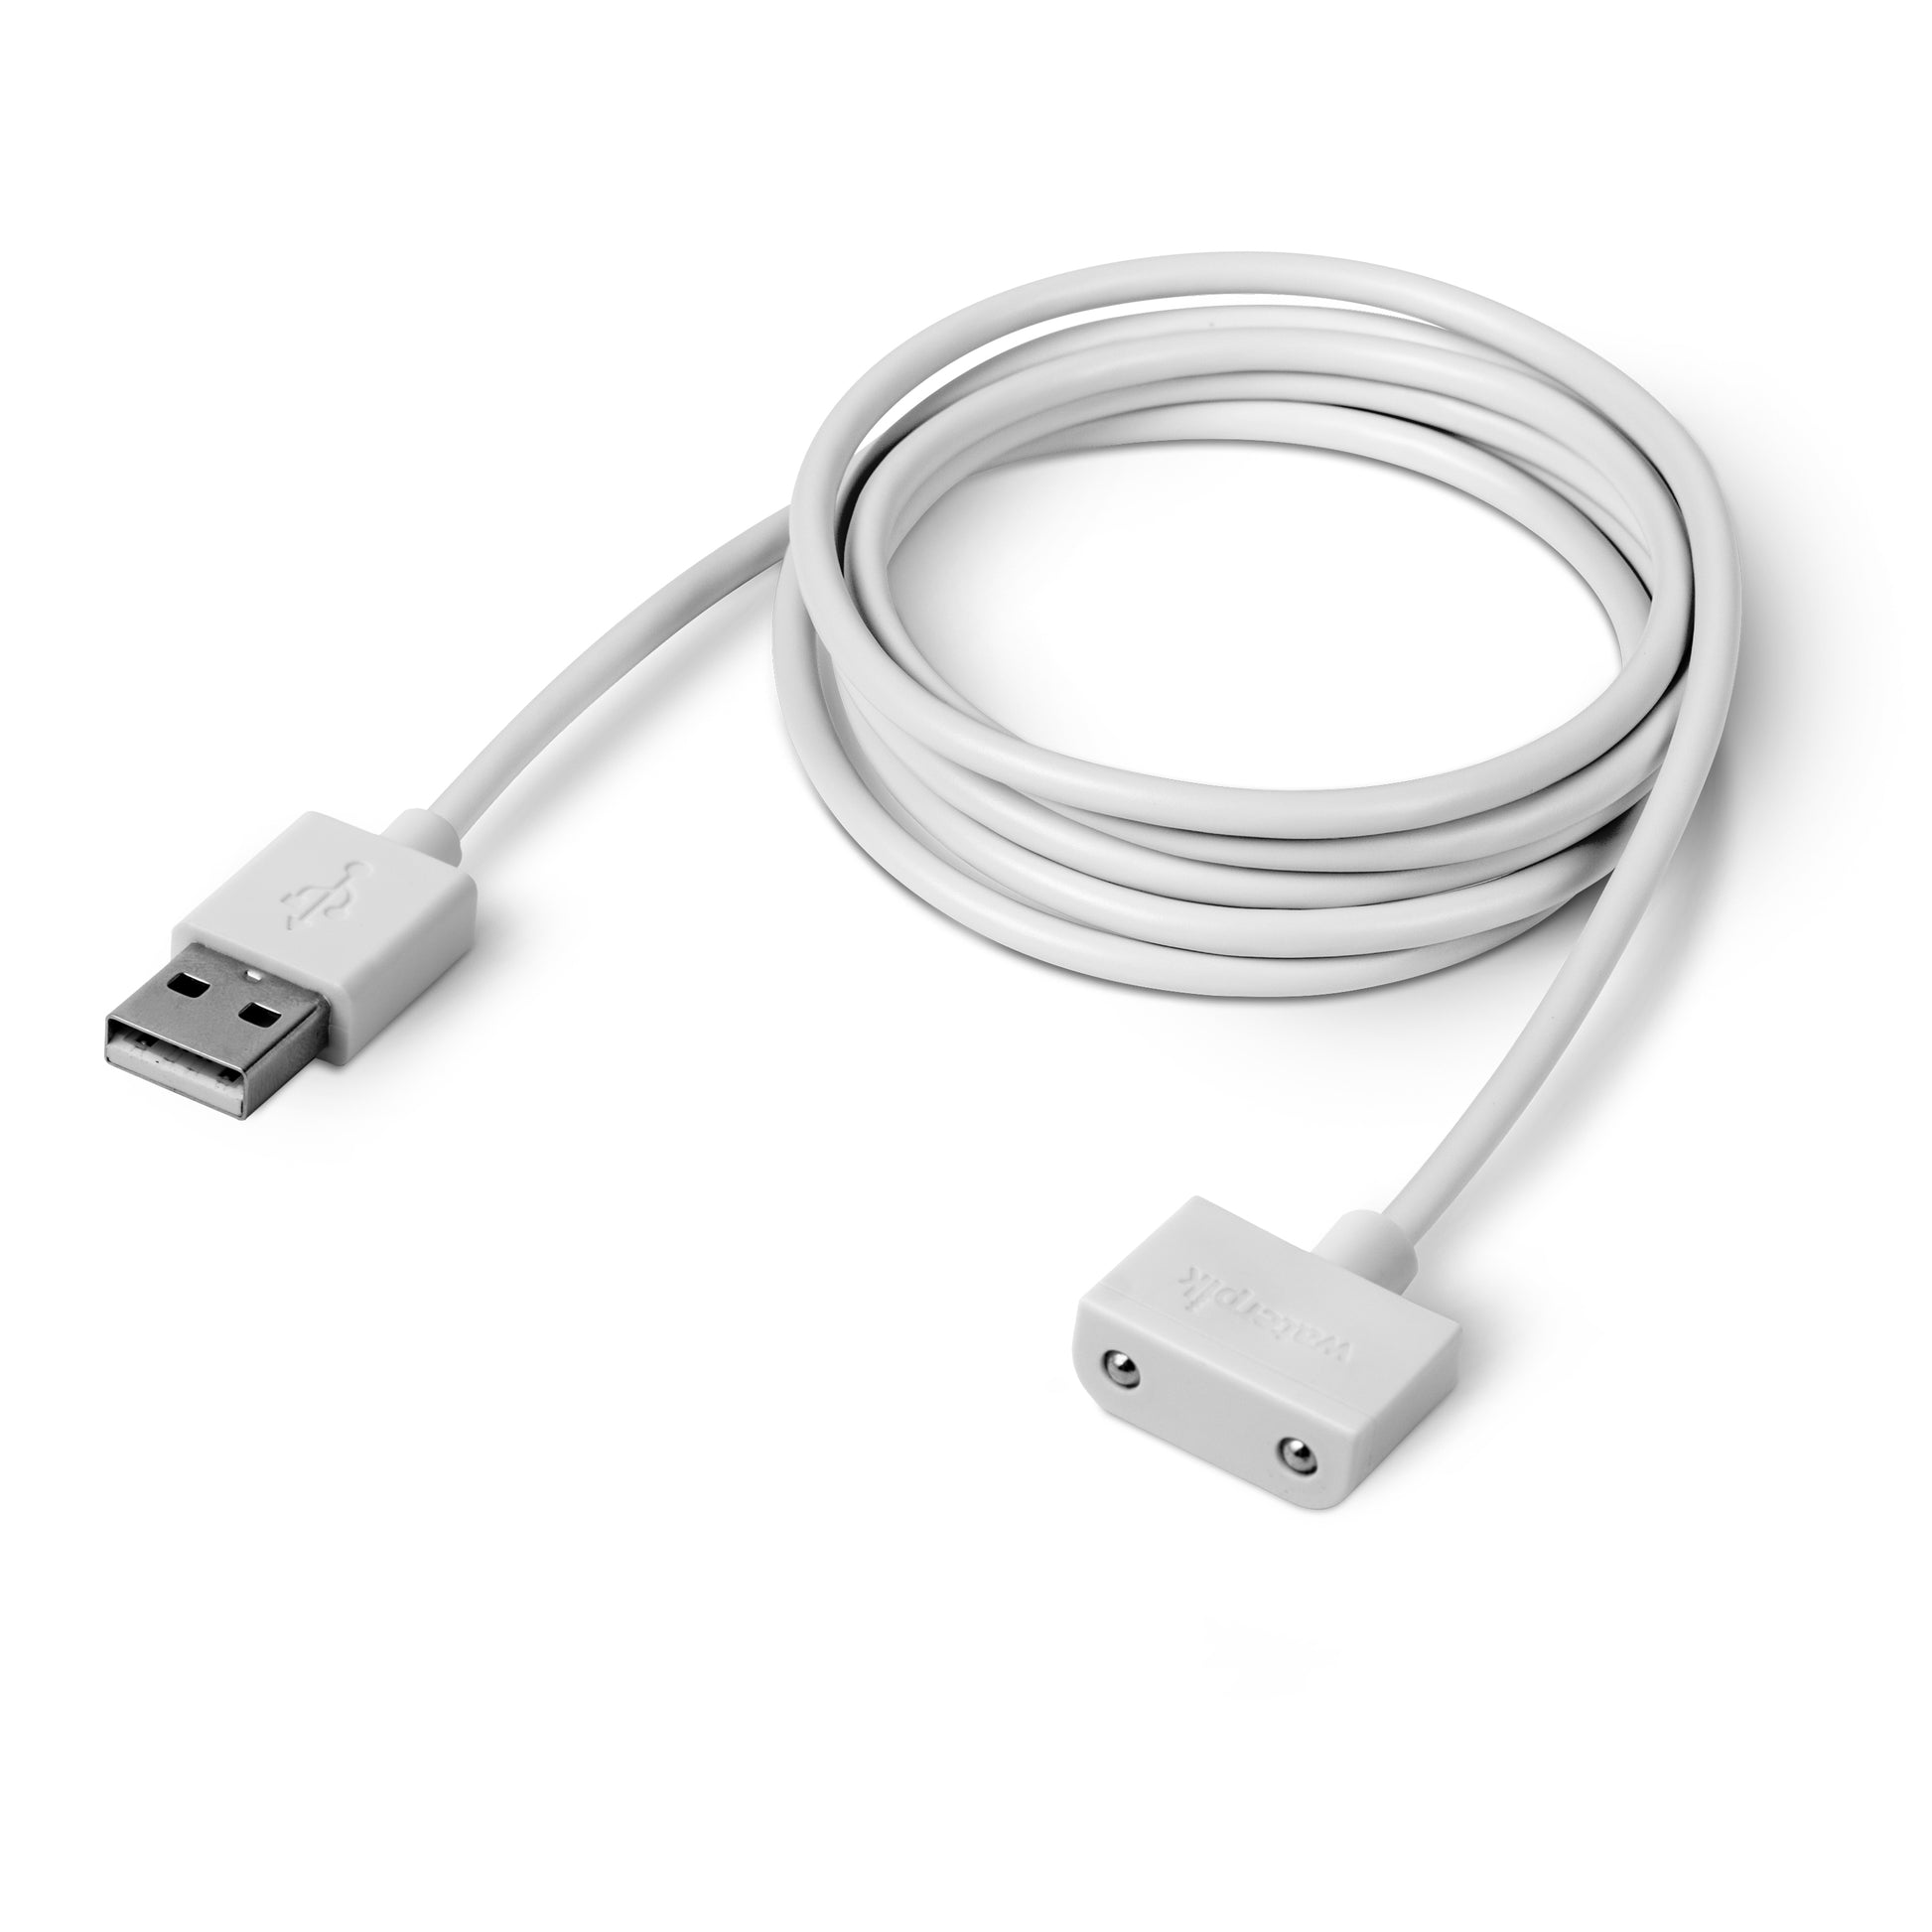 White Magnetic USB-A Charging Cable for Waterpik ION Cordless Water Flosser, WF-11/Wf-12